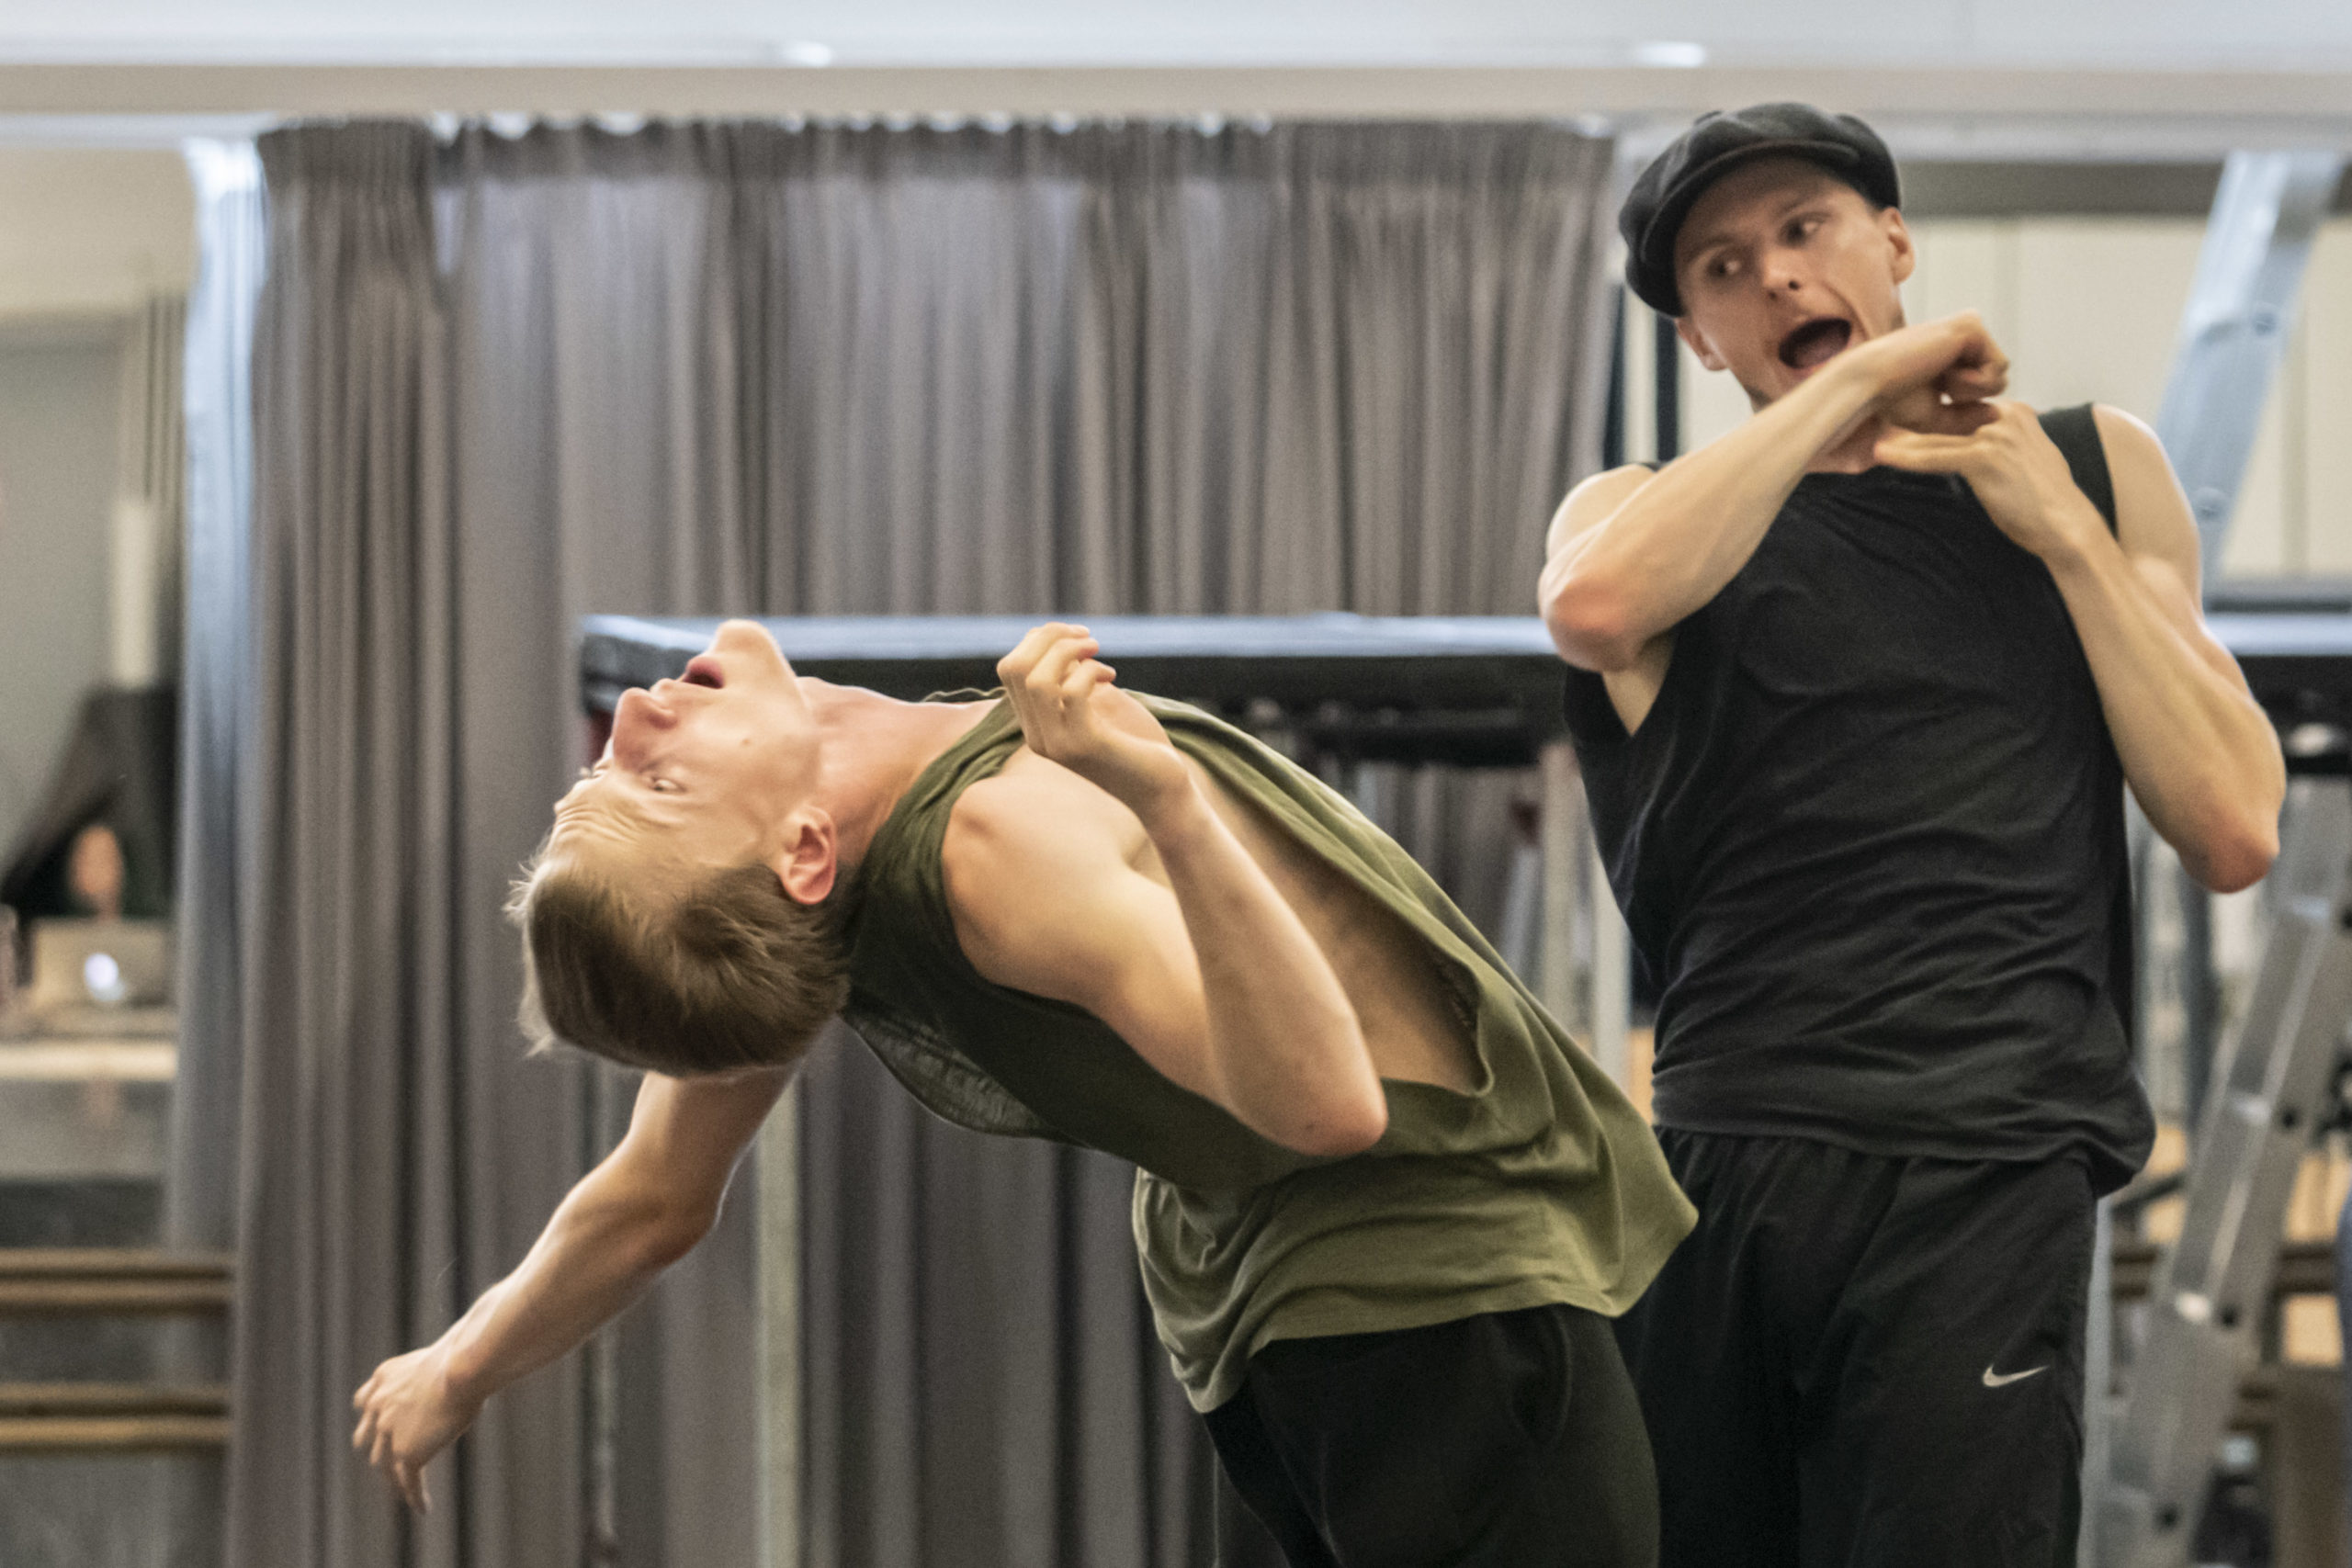 In a rehearsal studio, a male dancer arches back, arms akimbo like he is flailing after being hit. Behind him, another dancer finishes the swing of his clasped fists, mouth open wide like he is yelling, a cap worn on his head an addition to the more standard rehearsal clothes.